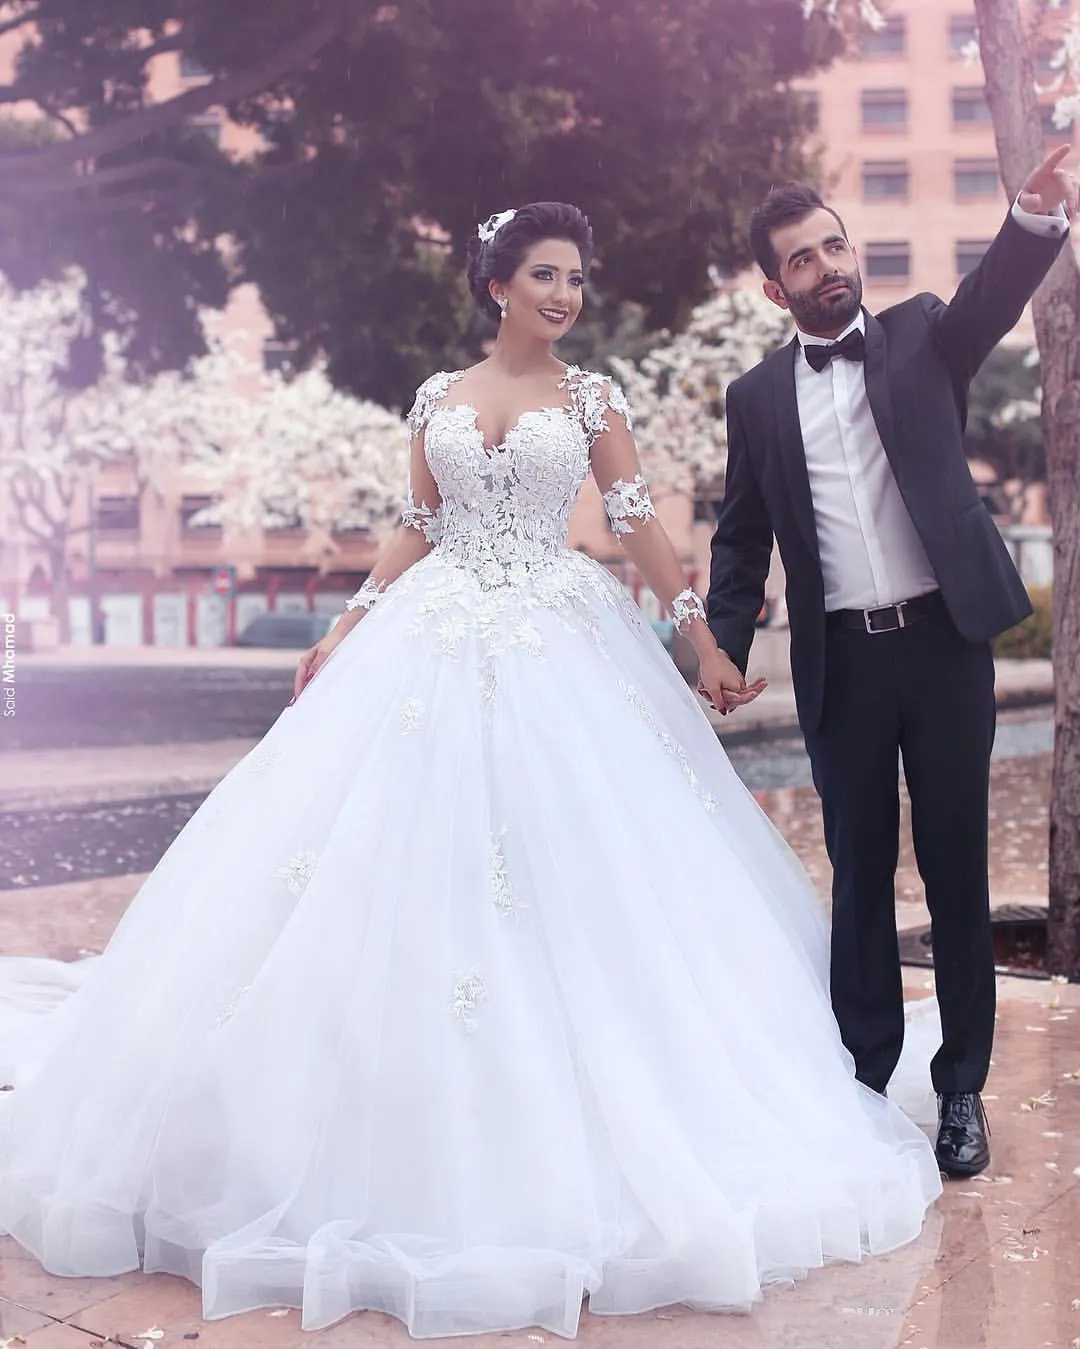 Princess Long Sleeves A Line Wedding Dress 2022 Arabic Dubai Formal Bridal Gowns Lace Appliques Beaded Pearls White Tulle Chapel Bride Dresses Custom Made Plus Size